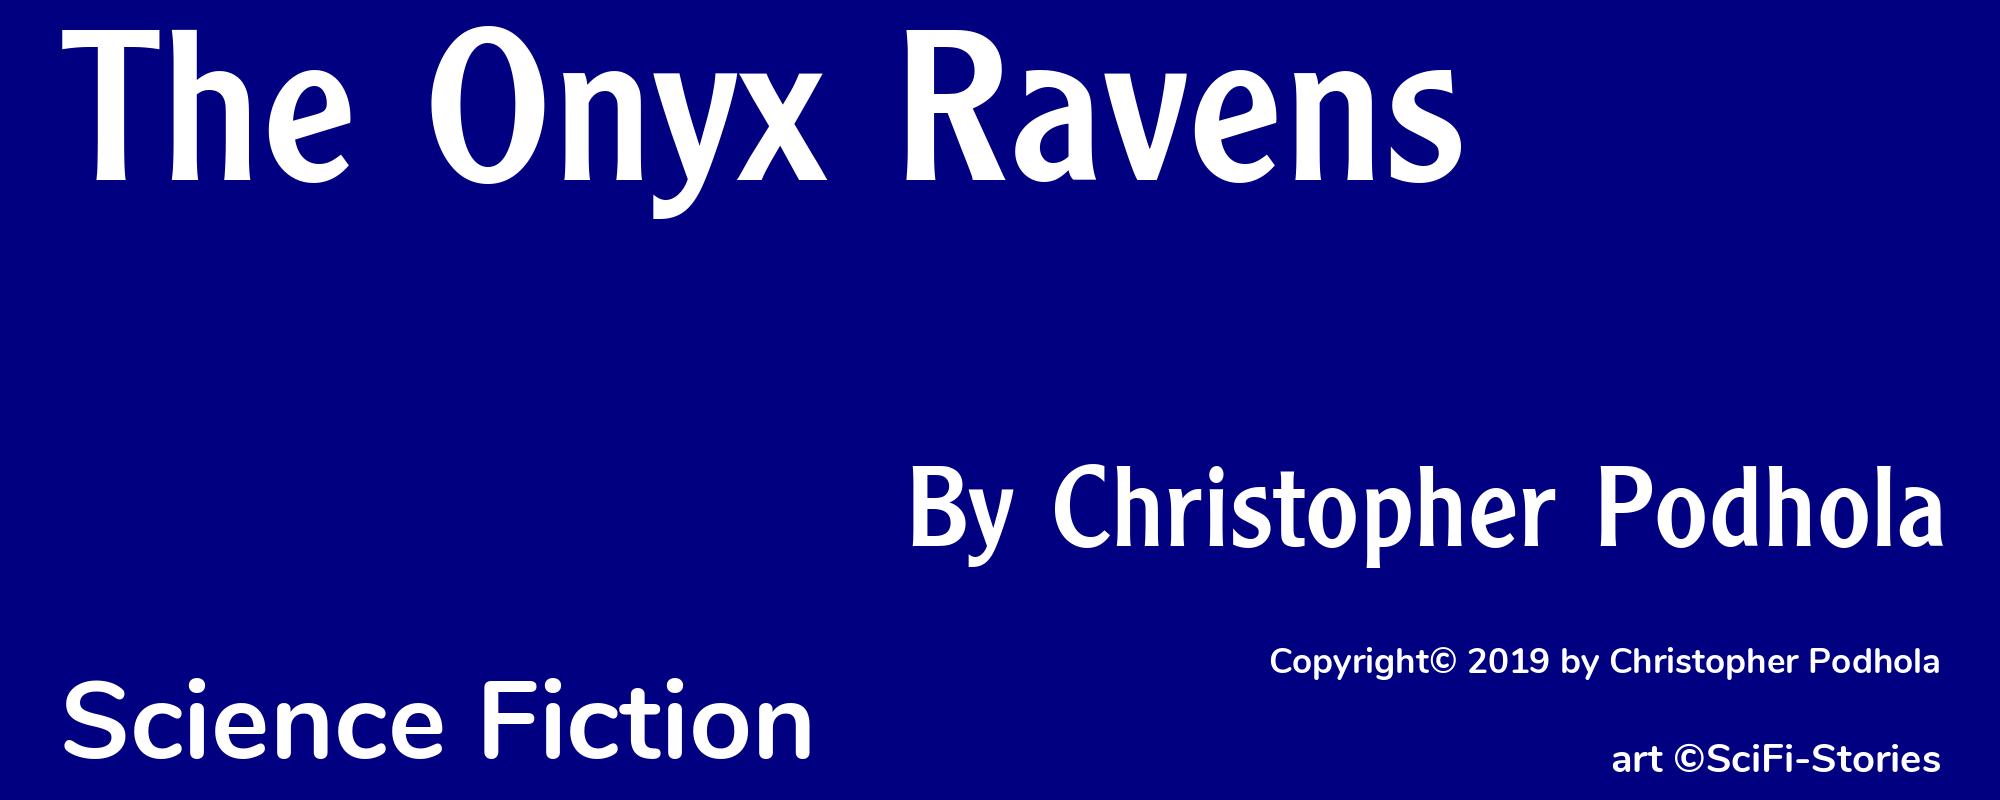 The Onyx Ravens - Cover